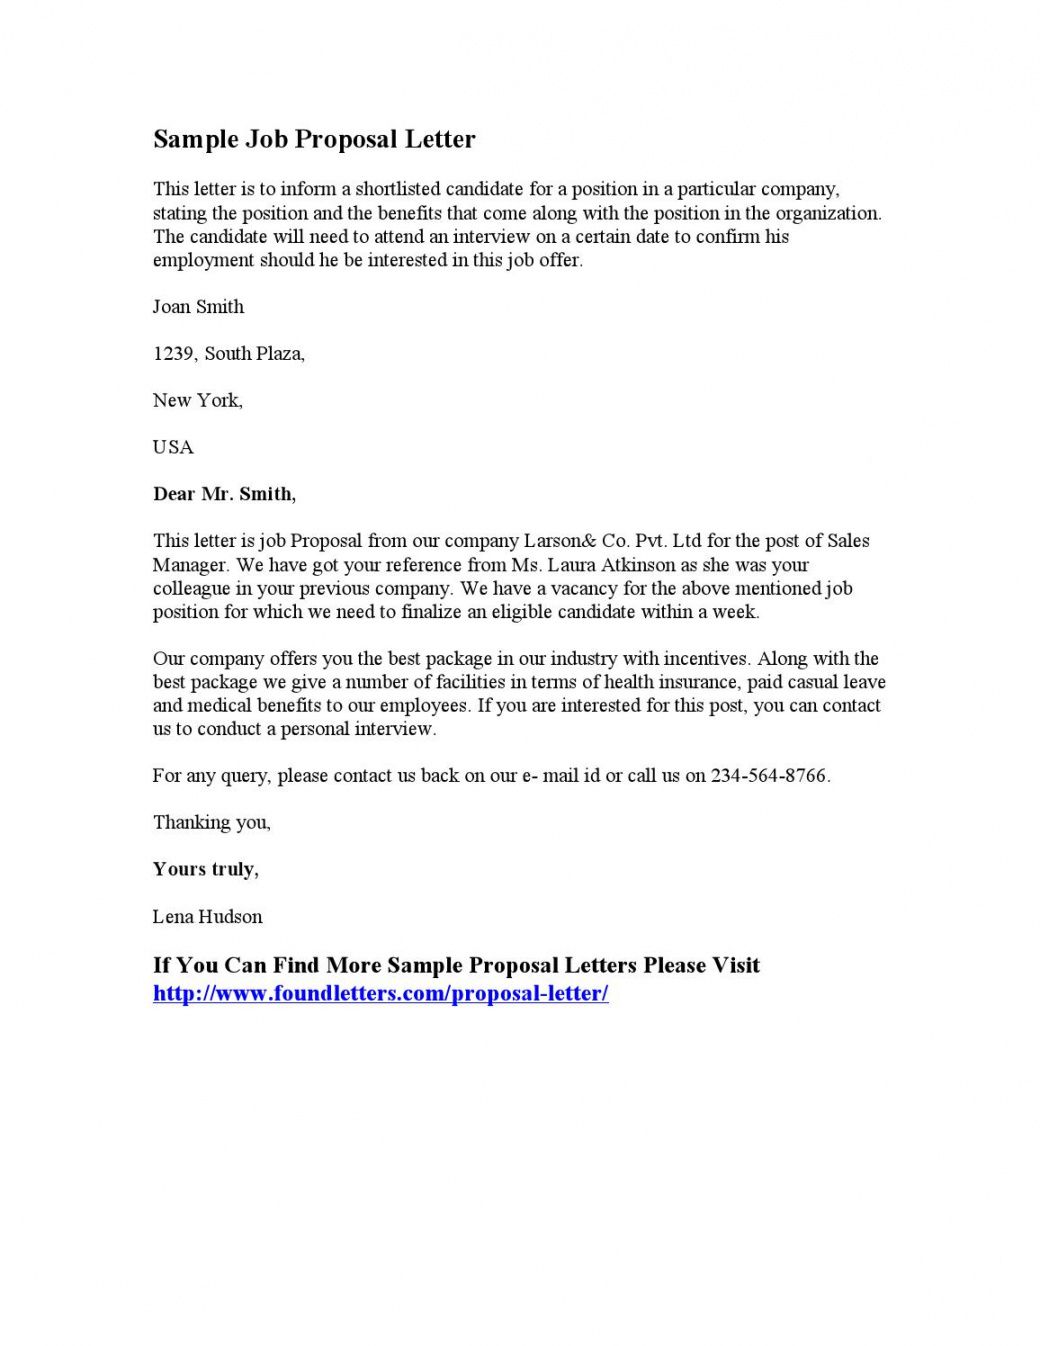 printable sample job proposal letter by found letters  issuu service proposal letter template excel